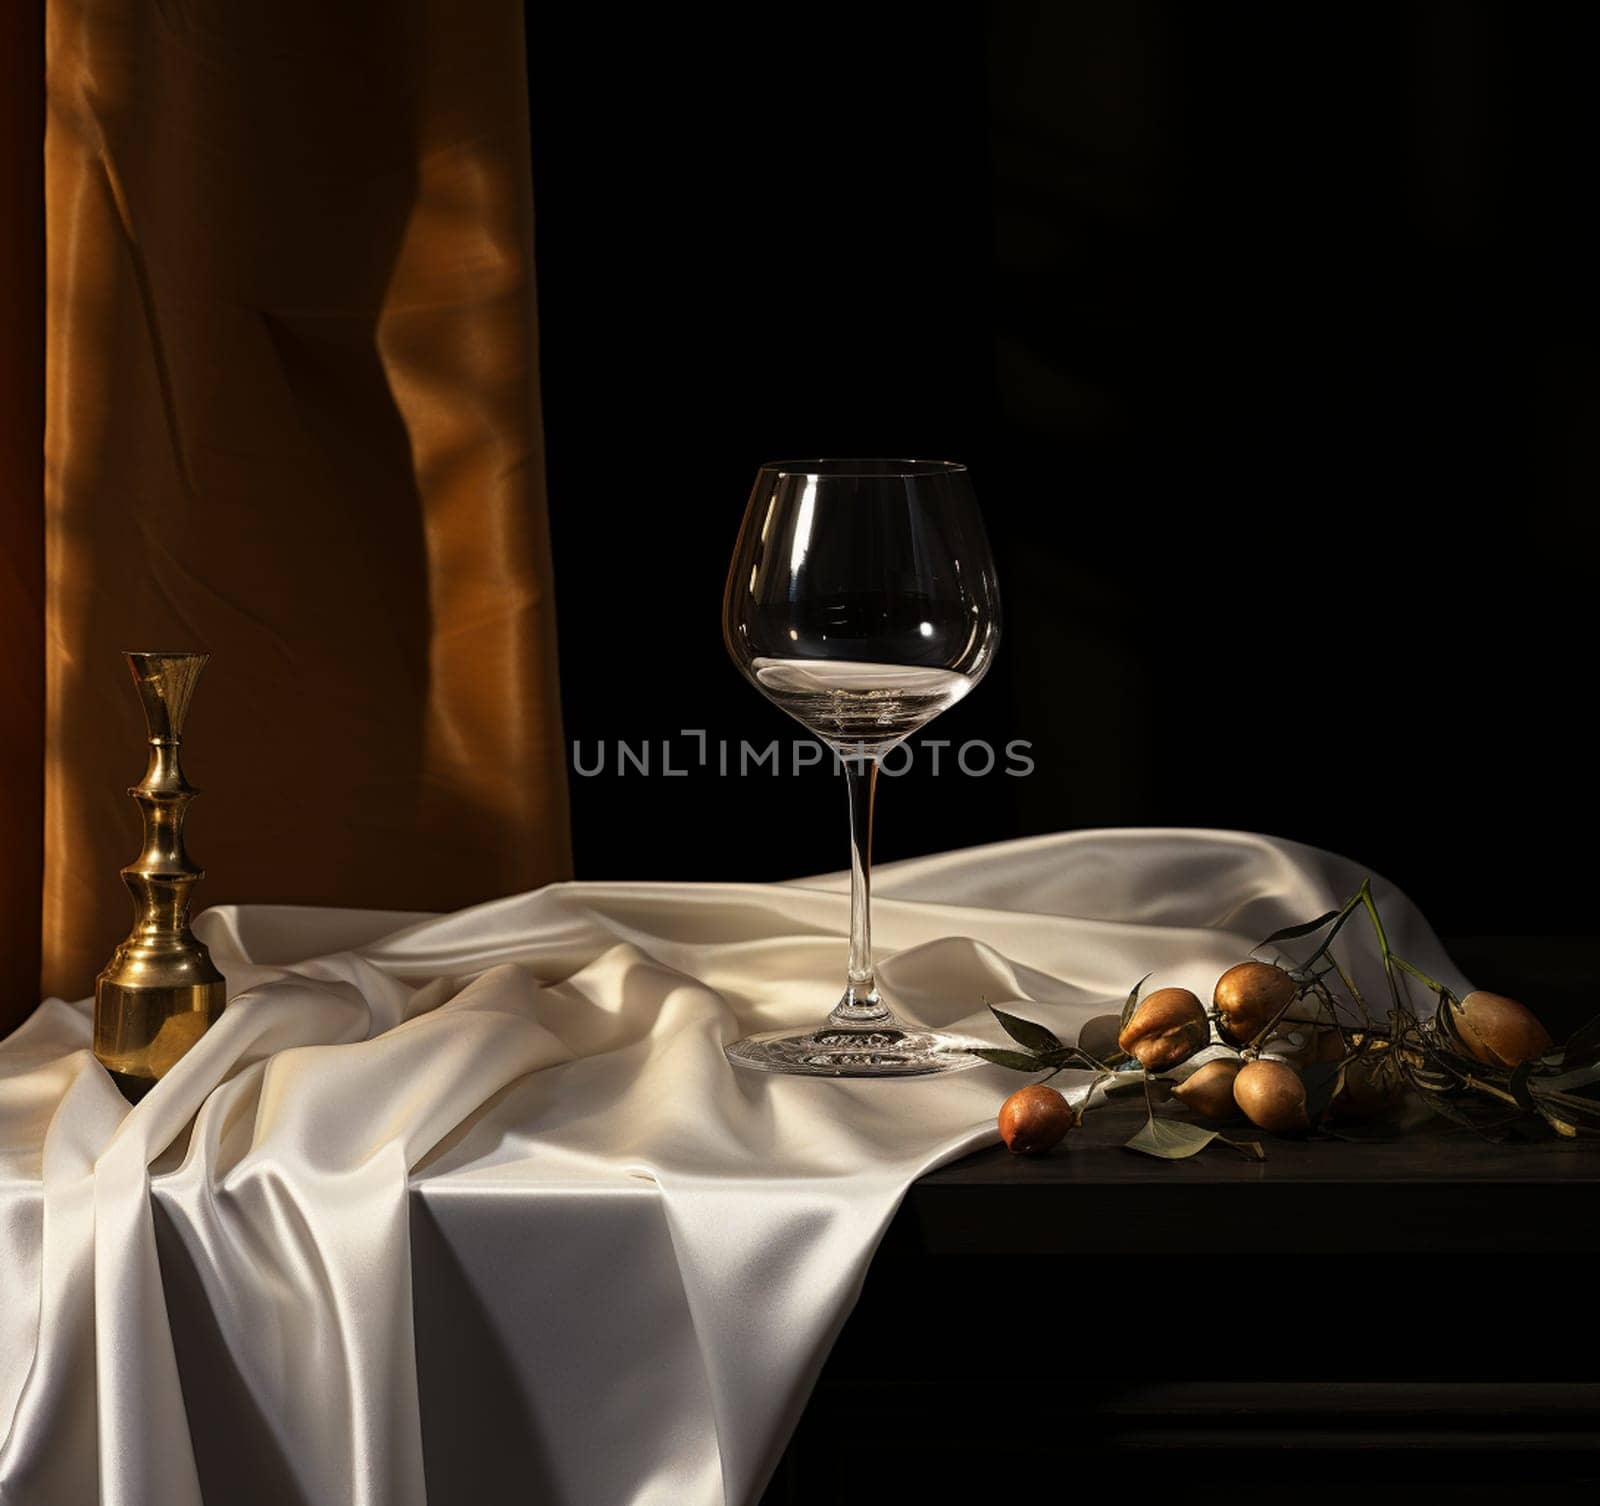 transparent glass, a wine glass of wine and a candle on a background of silk drapery. by Andelov13